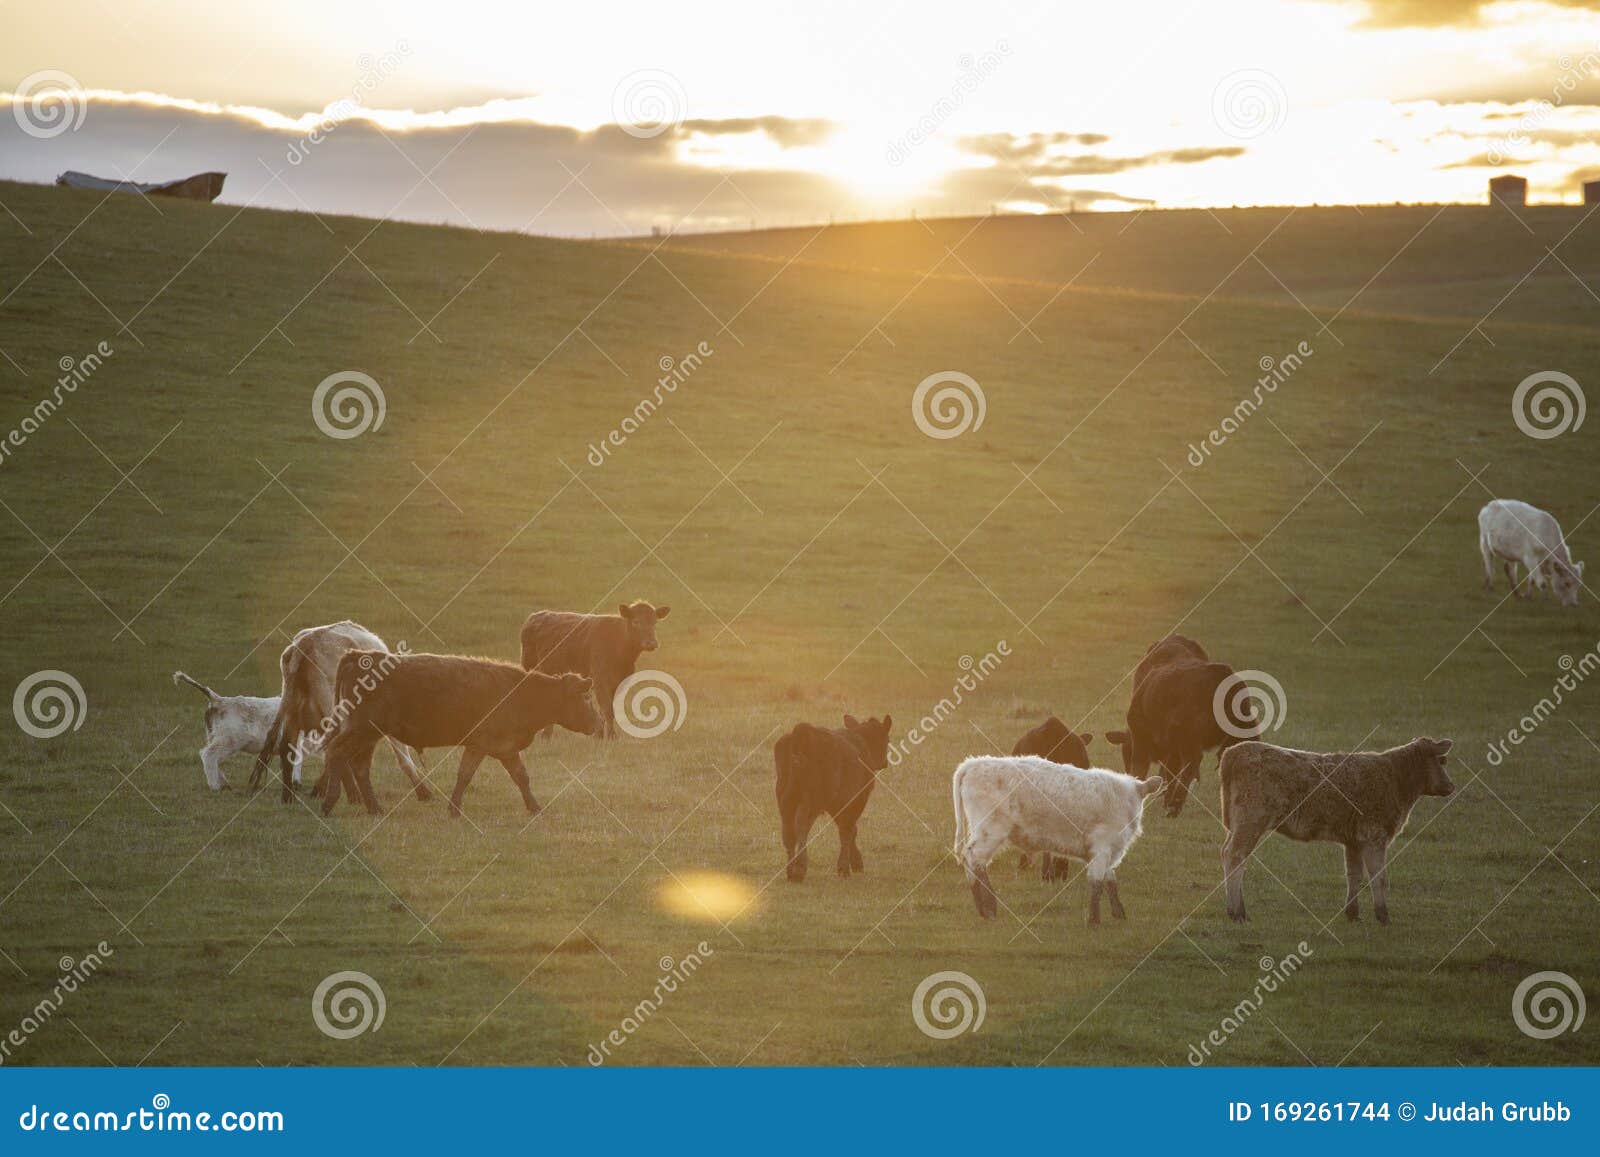 Cows in Field and Hills at Sunset Stock Photo - Image of farmland ...